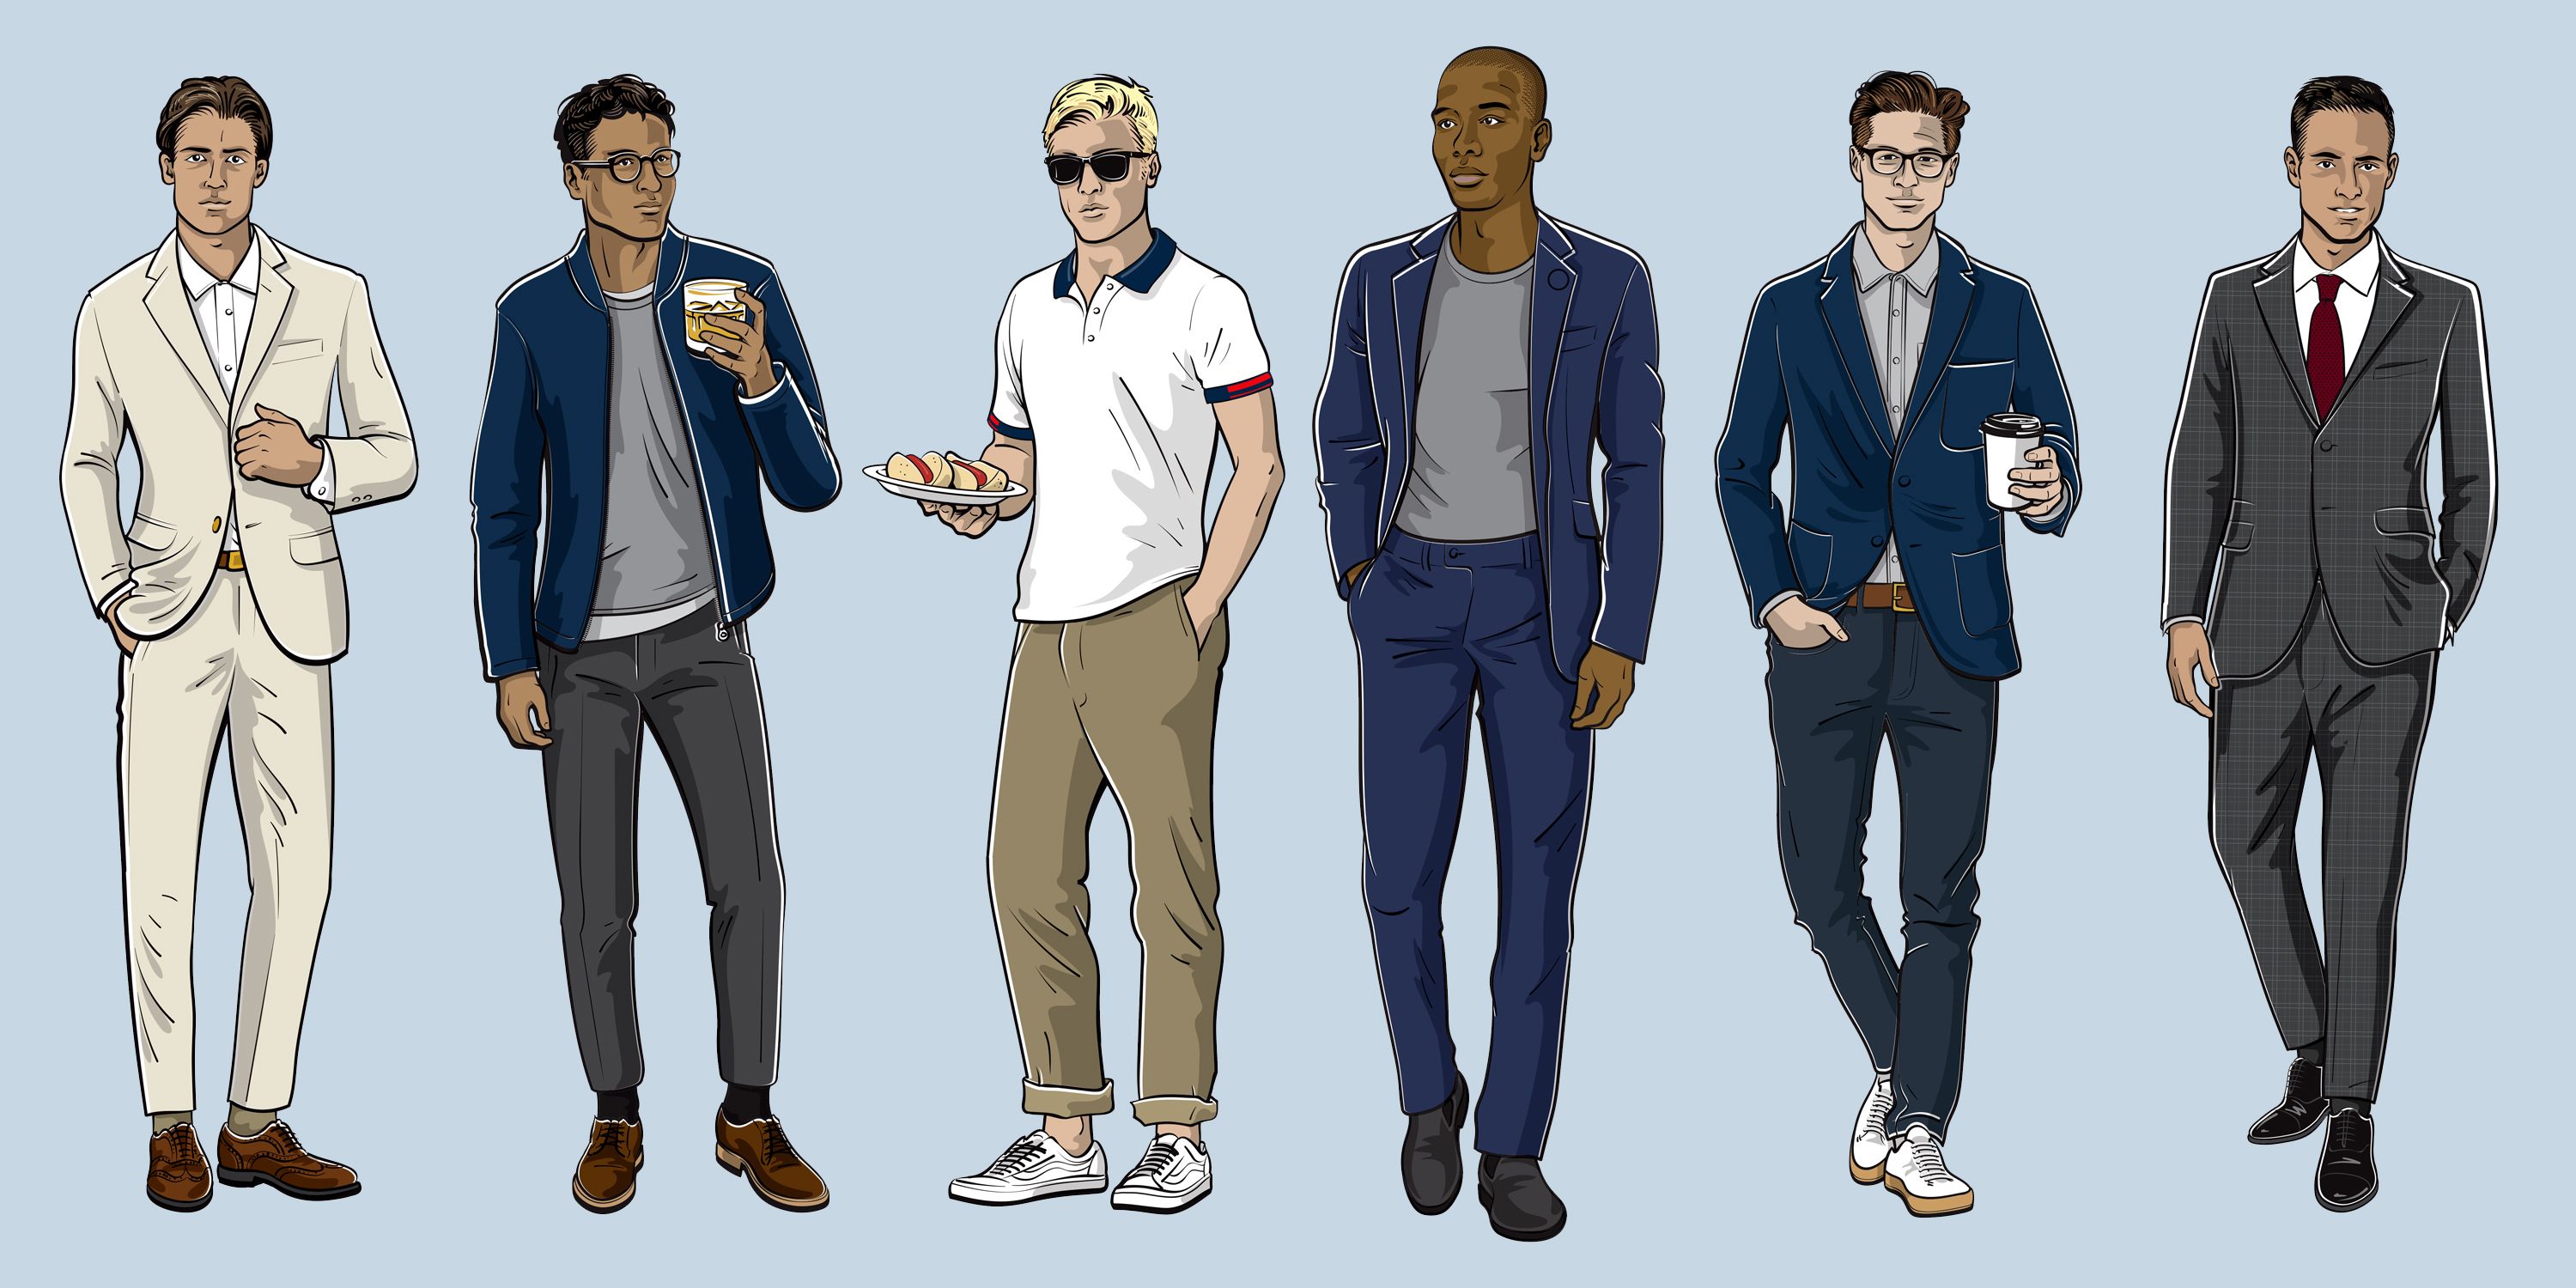 Men's Guide for What to Wear to an Office Party